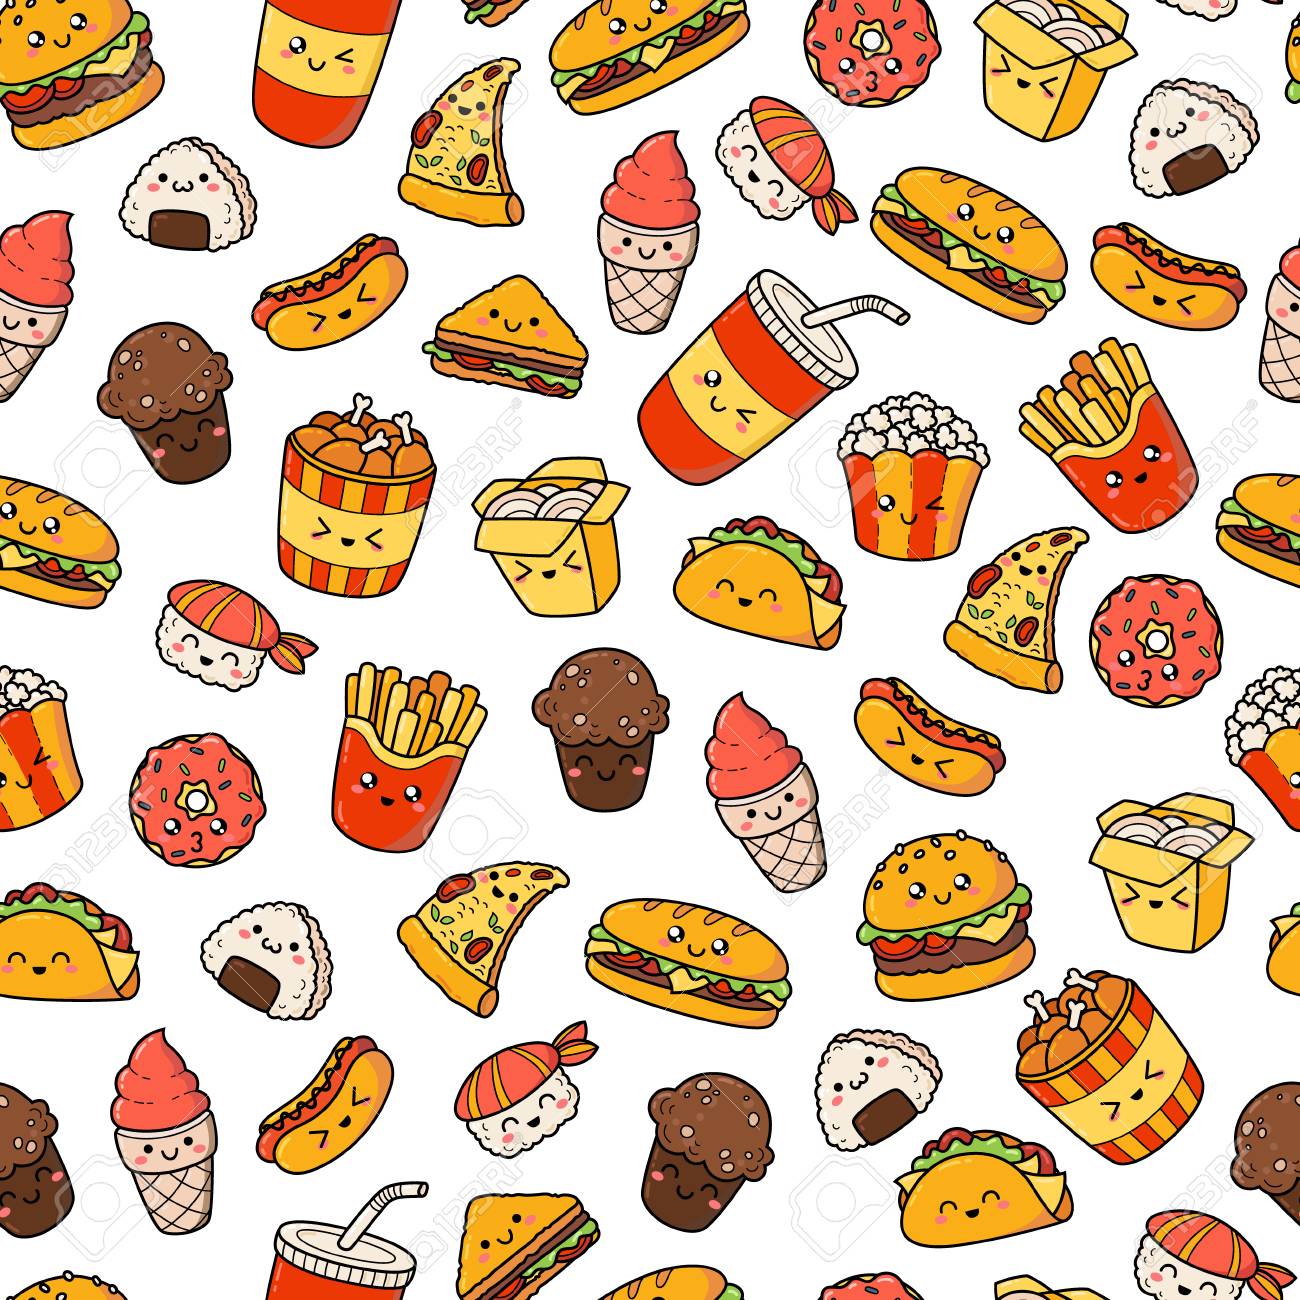 Set Of Vector Cartoon Doodle Icons Junk Food Illustration Of